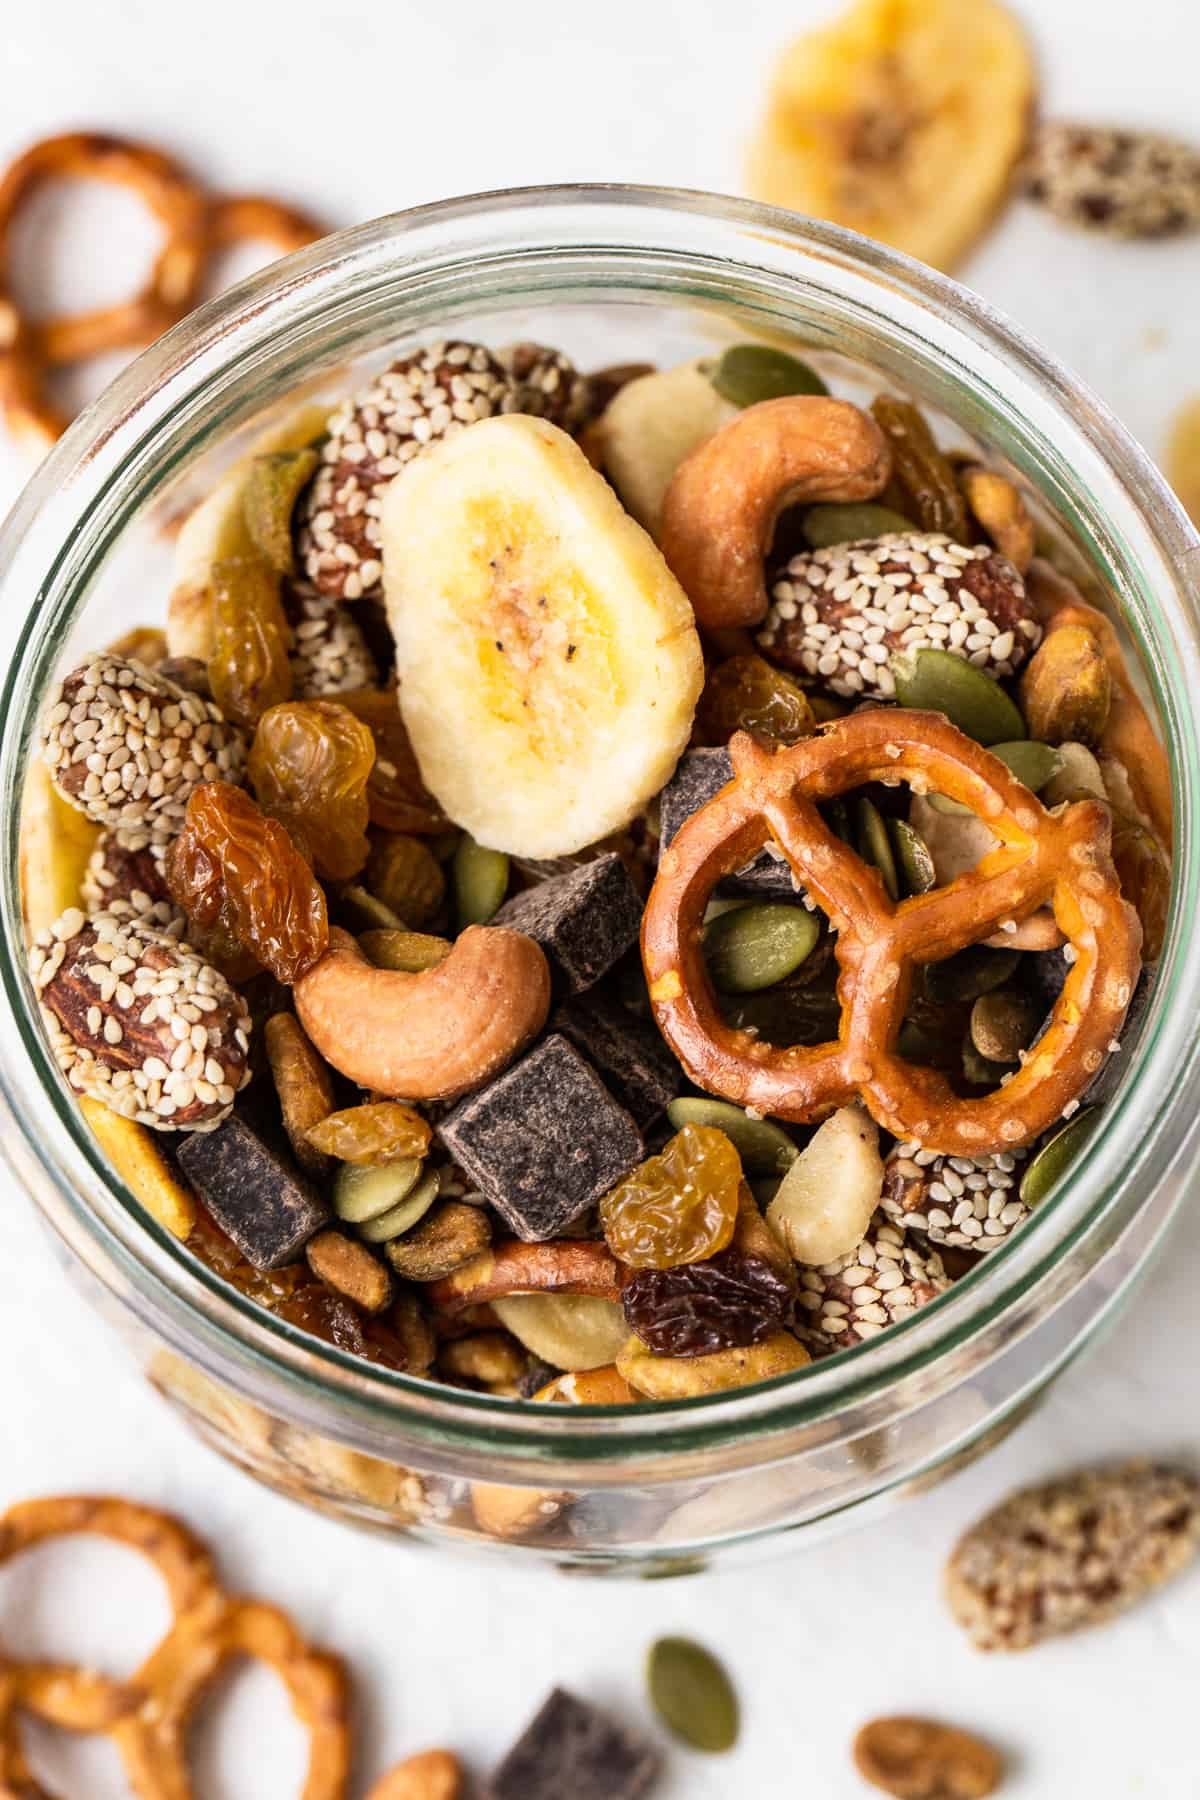 Homemade trail mix in a jar.